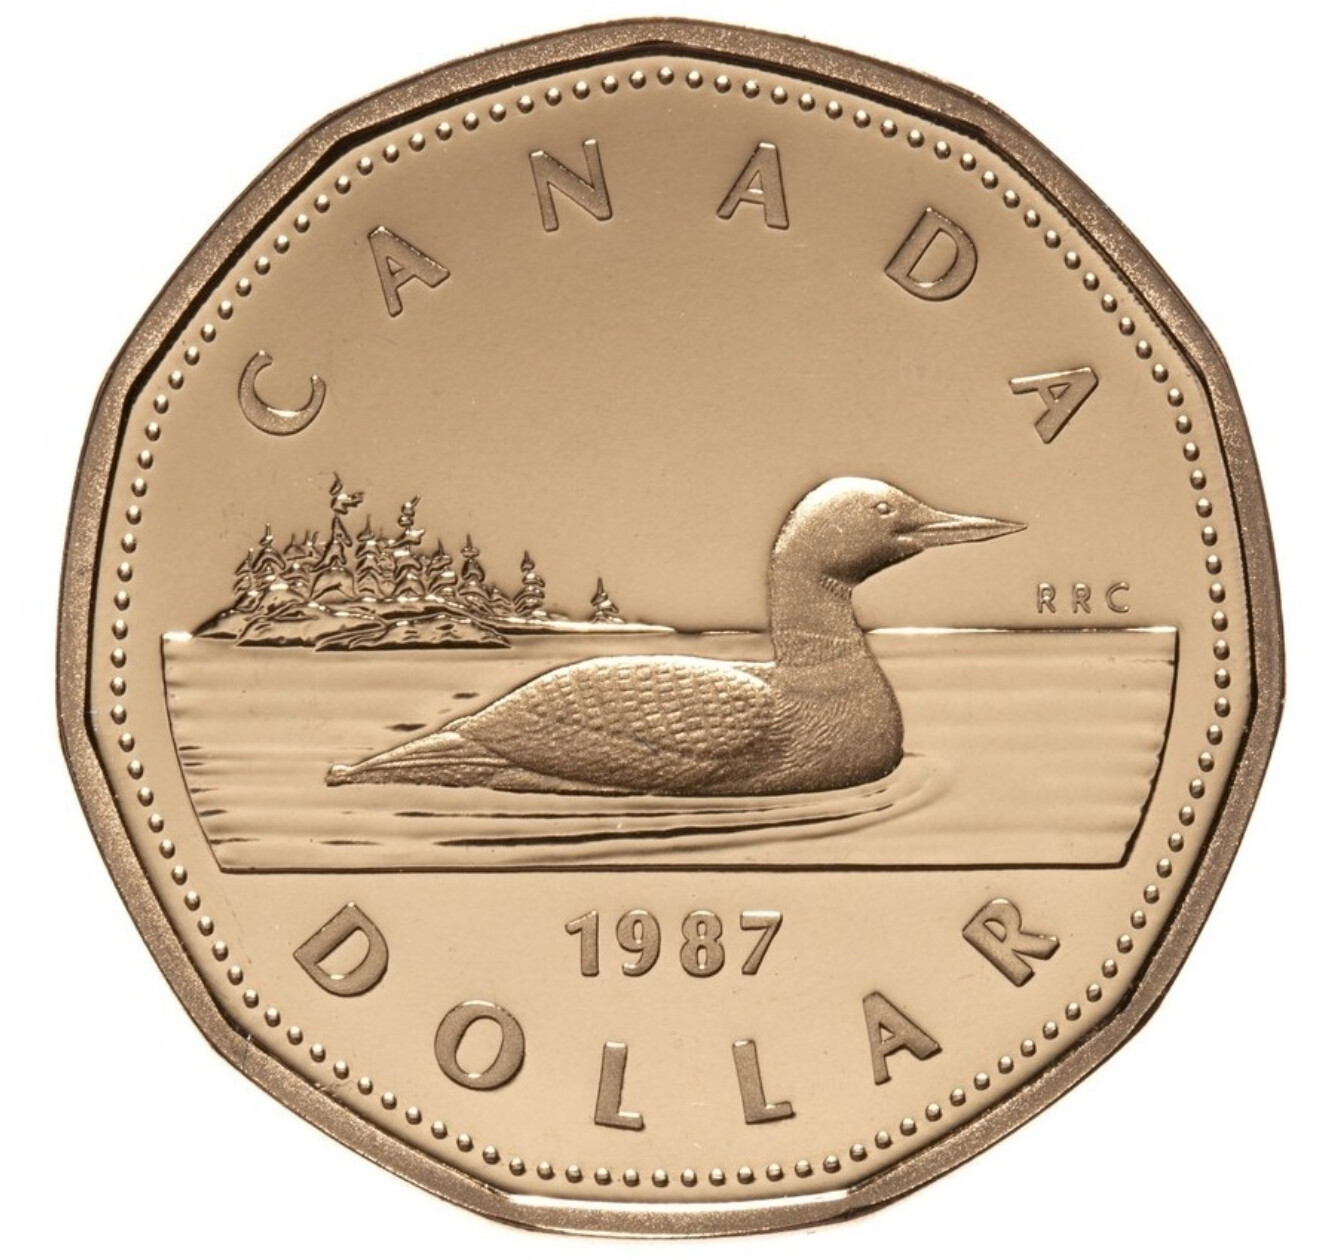 Canada 1987 Proof Loon with Box